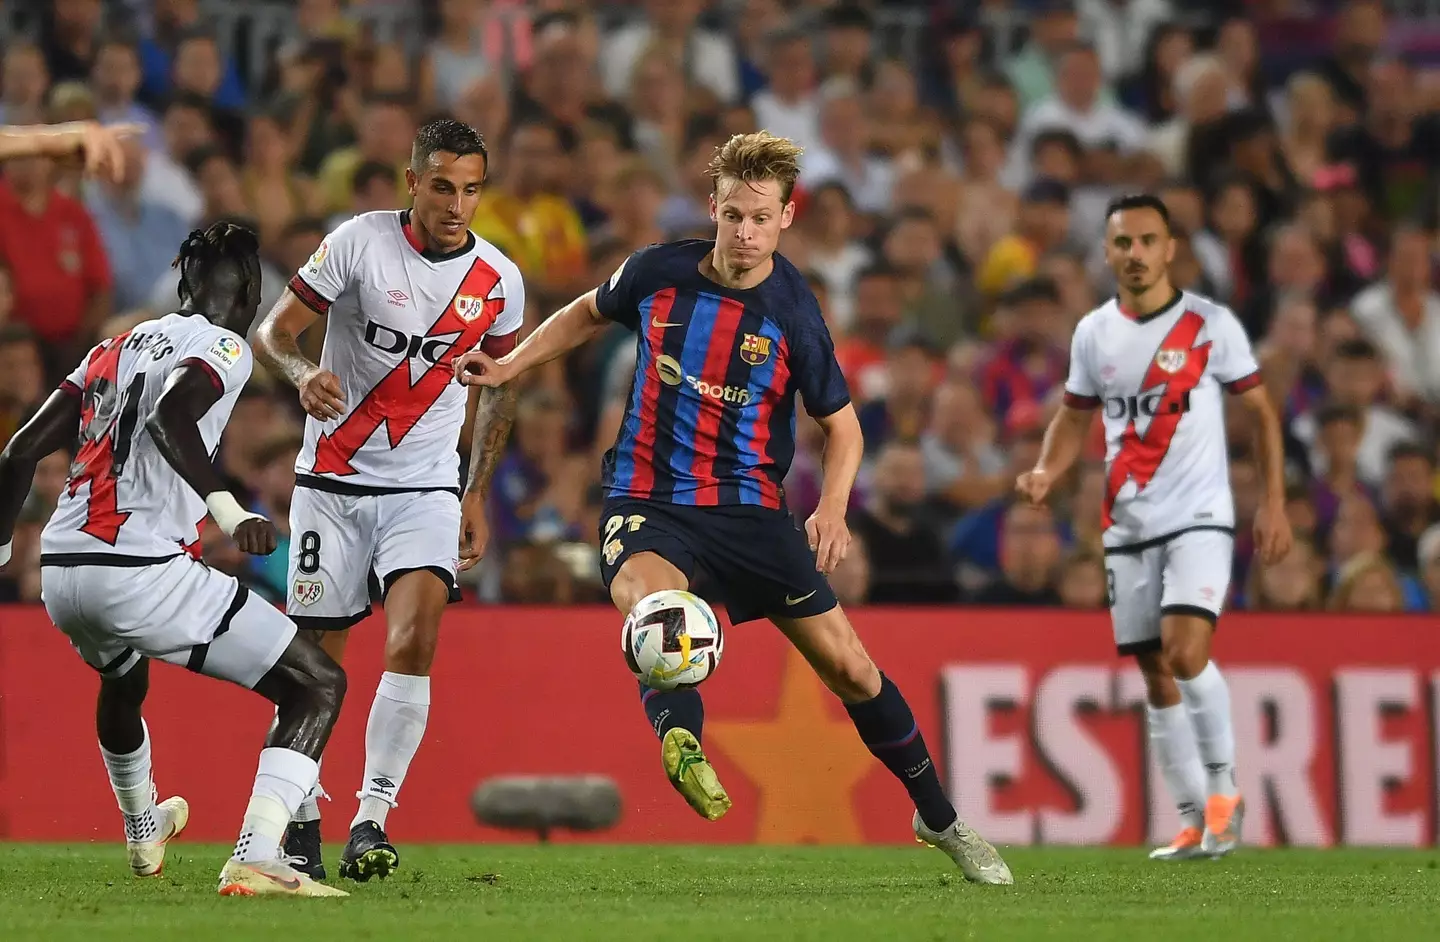 De Jong came off the bench against Vallecano. (Image